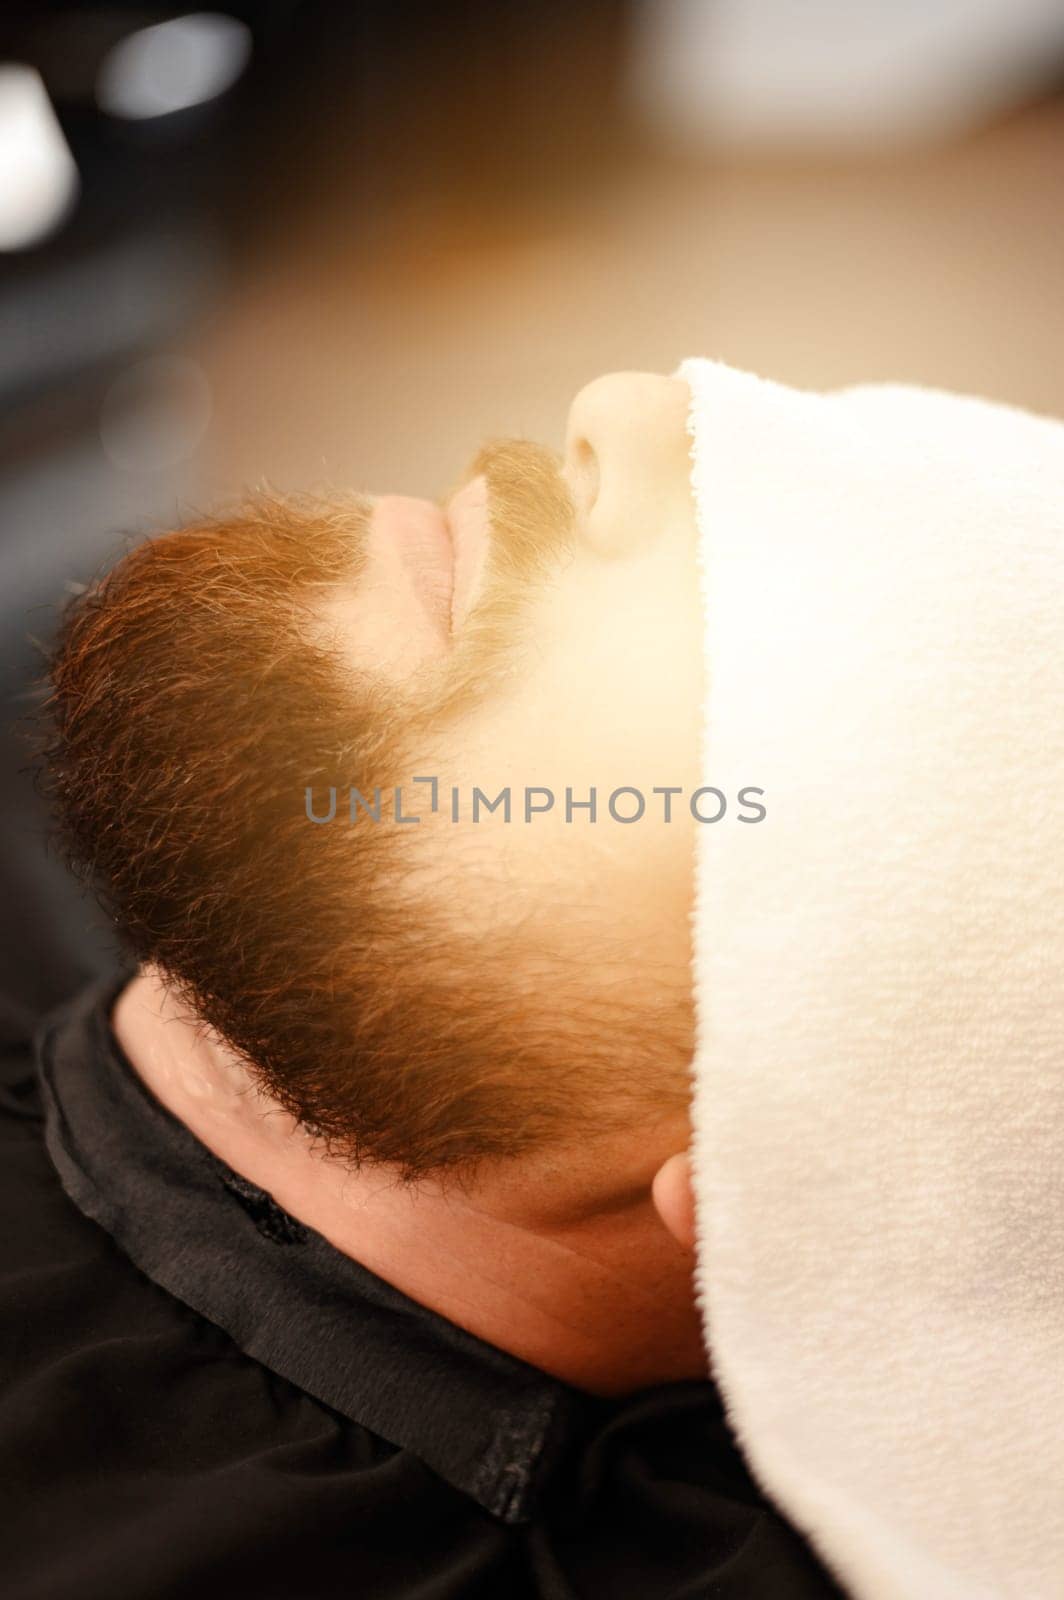 A client is lying on a chair in a barbershop with his beard wrapped in a towel. A towel covers the mans eyes.